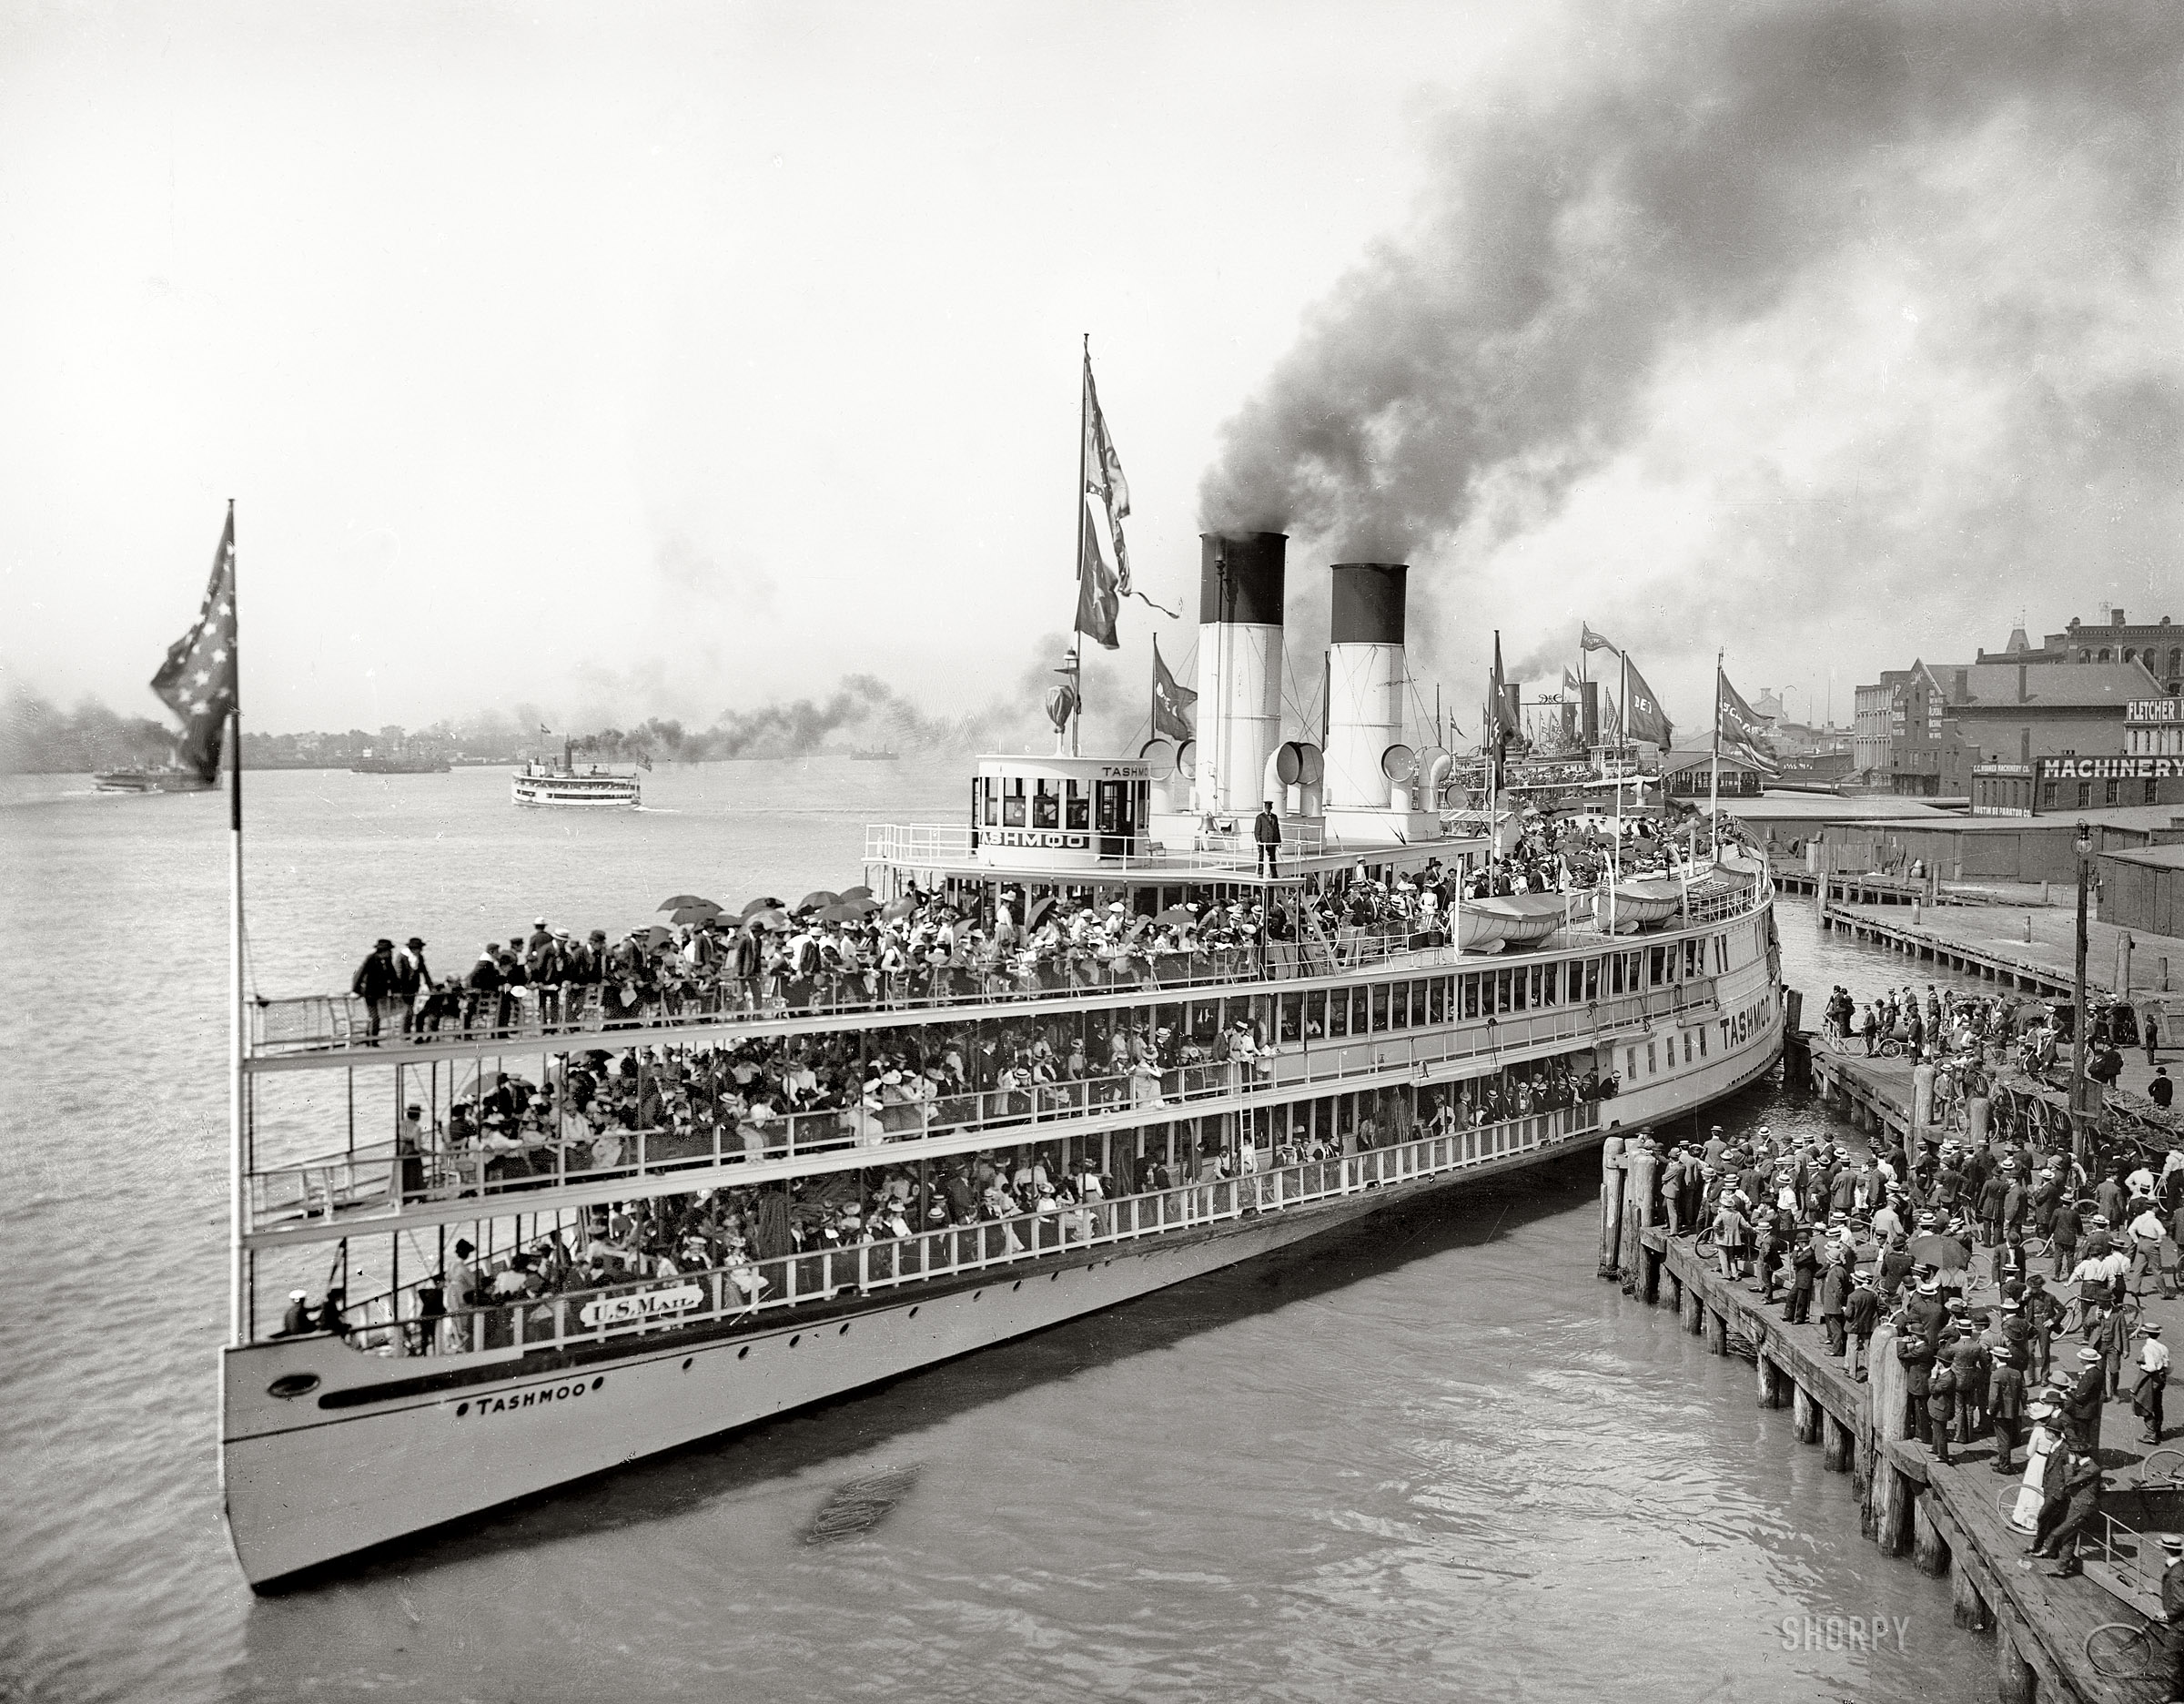 Detroit circa 1901. "Steamer Tashmoo leaving wharf." Another look at the popular excursion steamer with a capacity crowd of day trippers. 8x10 inch dry plate glass negative, Detroit Publishing Company. View full size.